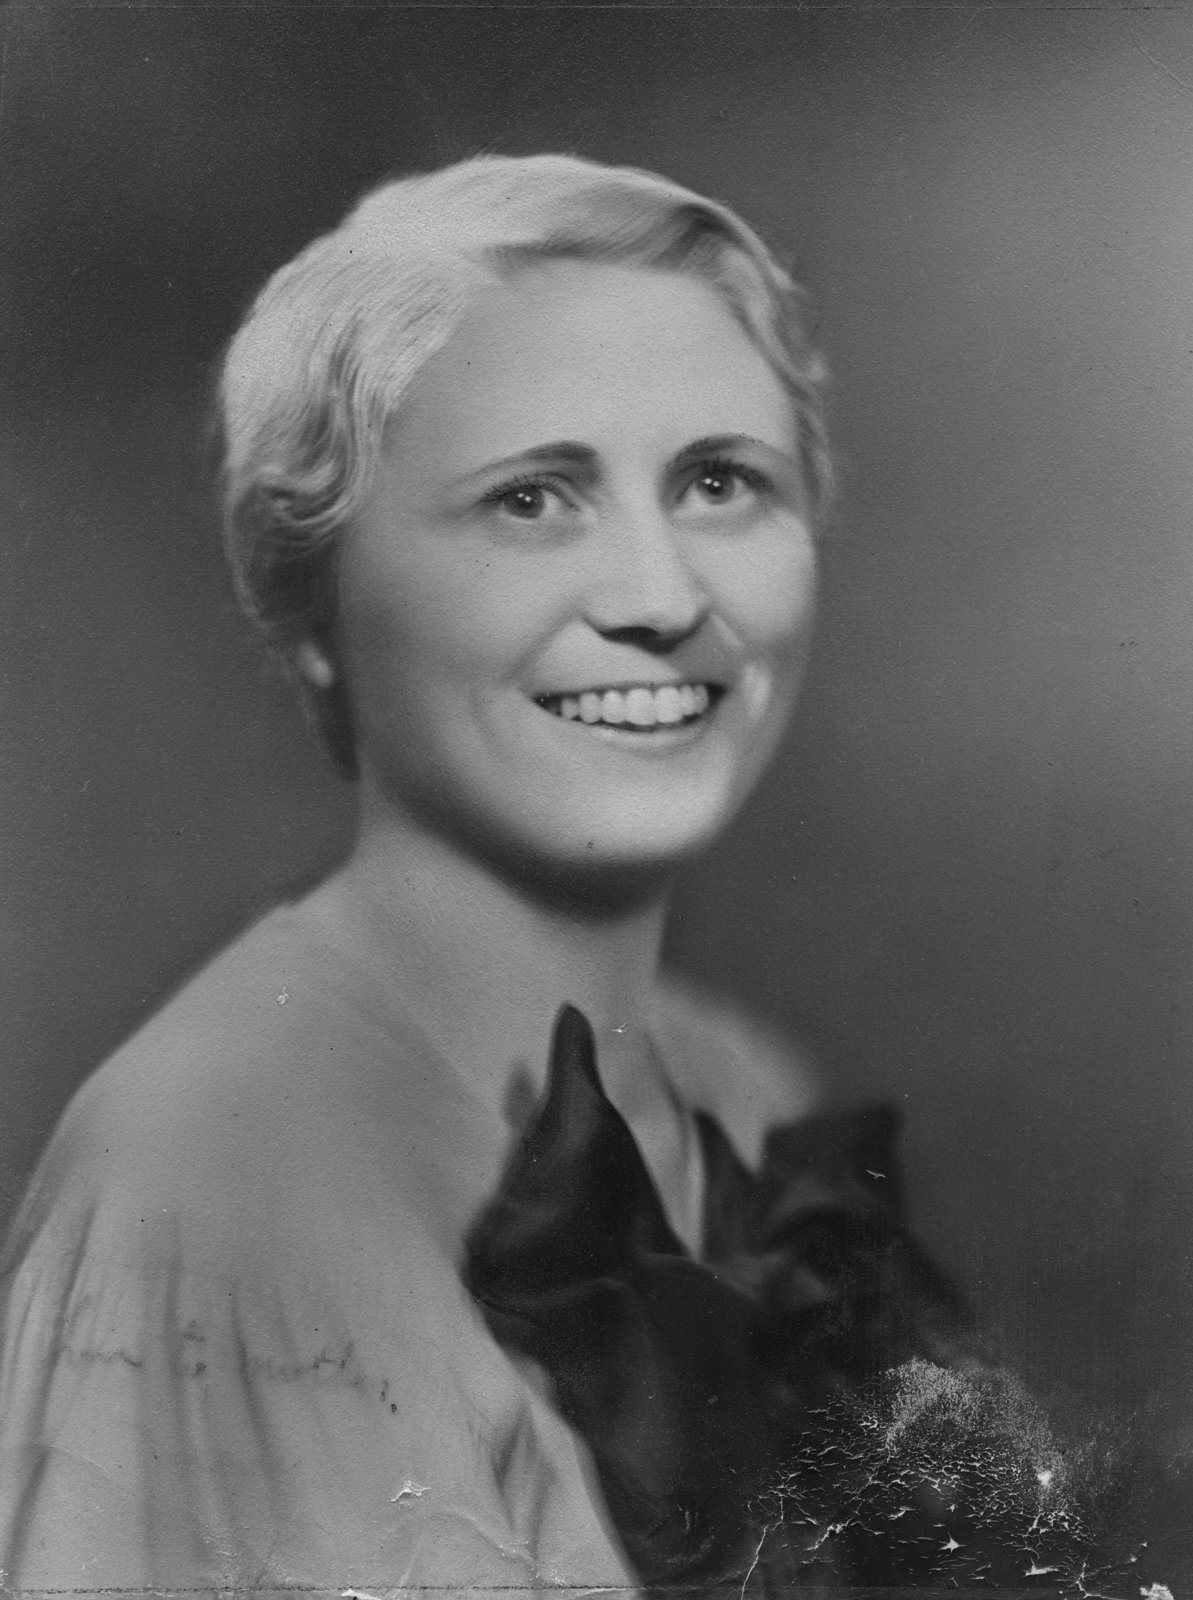 This is a studio portrait of Mary Lydon, nee McGing in Chicago of the 1930s.